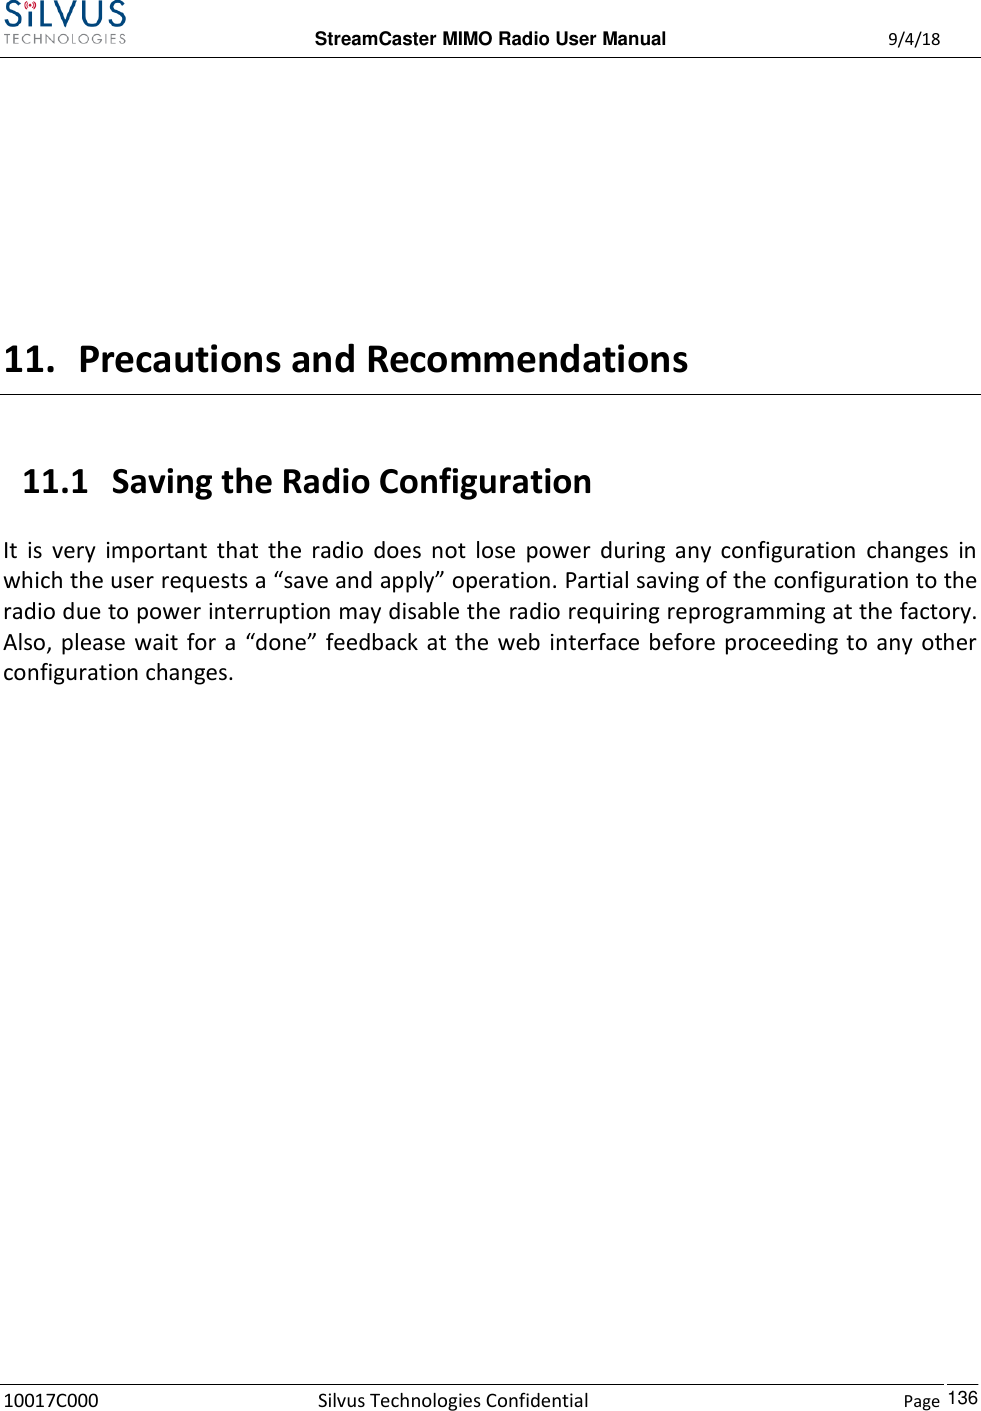  StreamCaster MIMO Radio User Manual  9/4/18 10017C000 Silvus Technologies Confidential    Page    136    11. Precautions and Recommendations 11.1 Saving the Radio Configuration It  is  very  important  that  the  radio  does  not  lose  power  during  any  configuration  changes  in which the user requests a “save and apply” operation. Partial saving of the configuration to the radio due to power interruption may disable the radio requiring reprogramming at the factory. Also, please wait  for  a  “done” feedback at  the  web interface before proceeding to  any other configuration changes.             